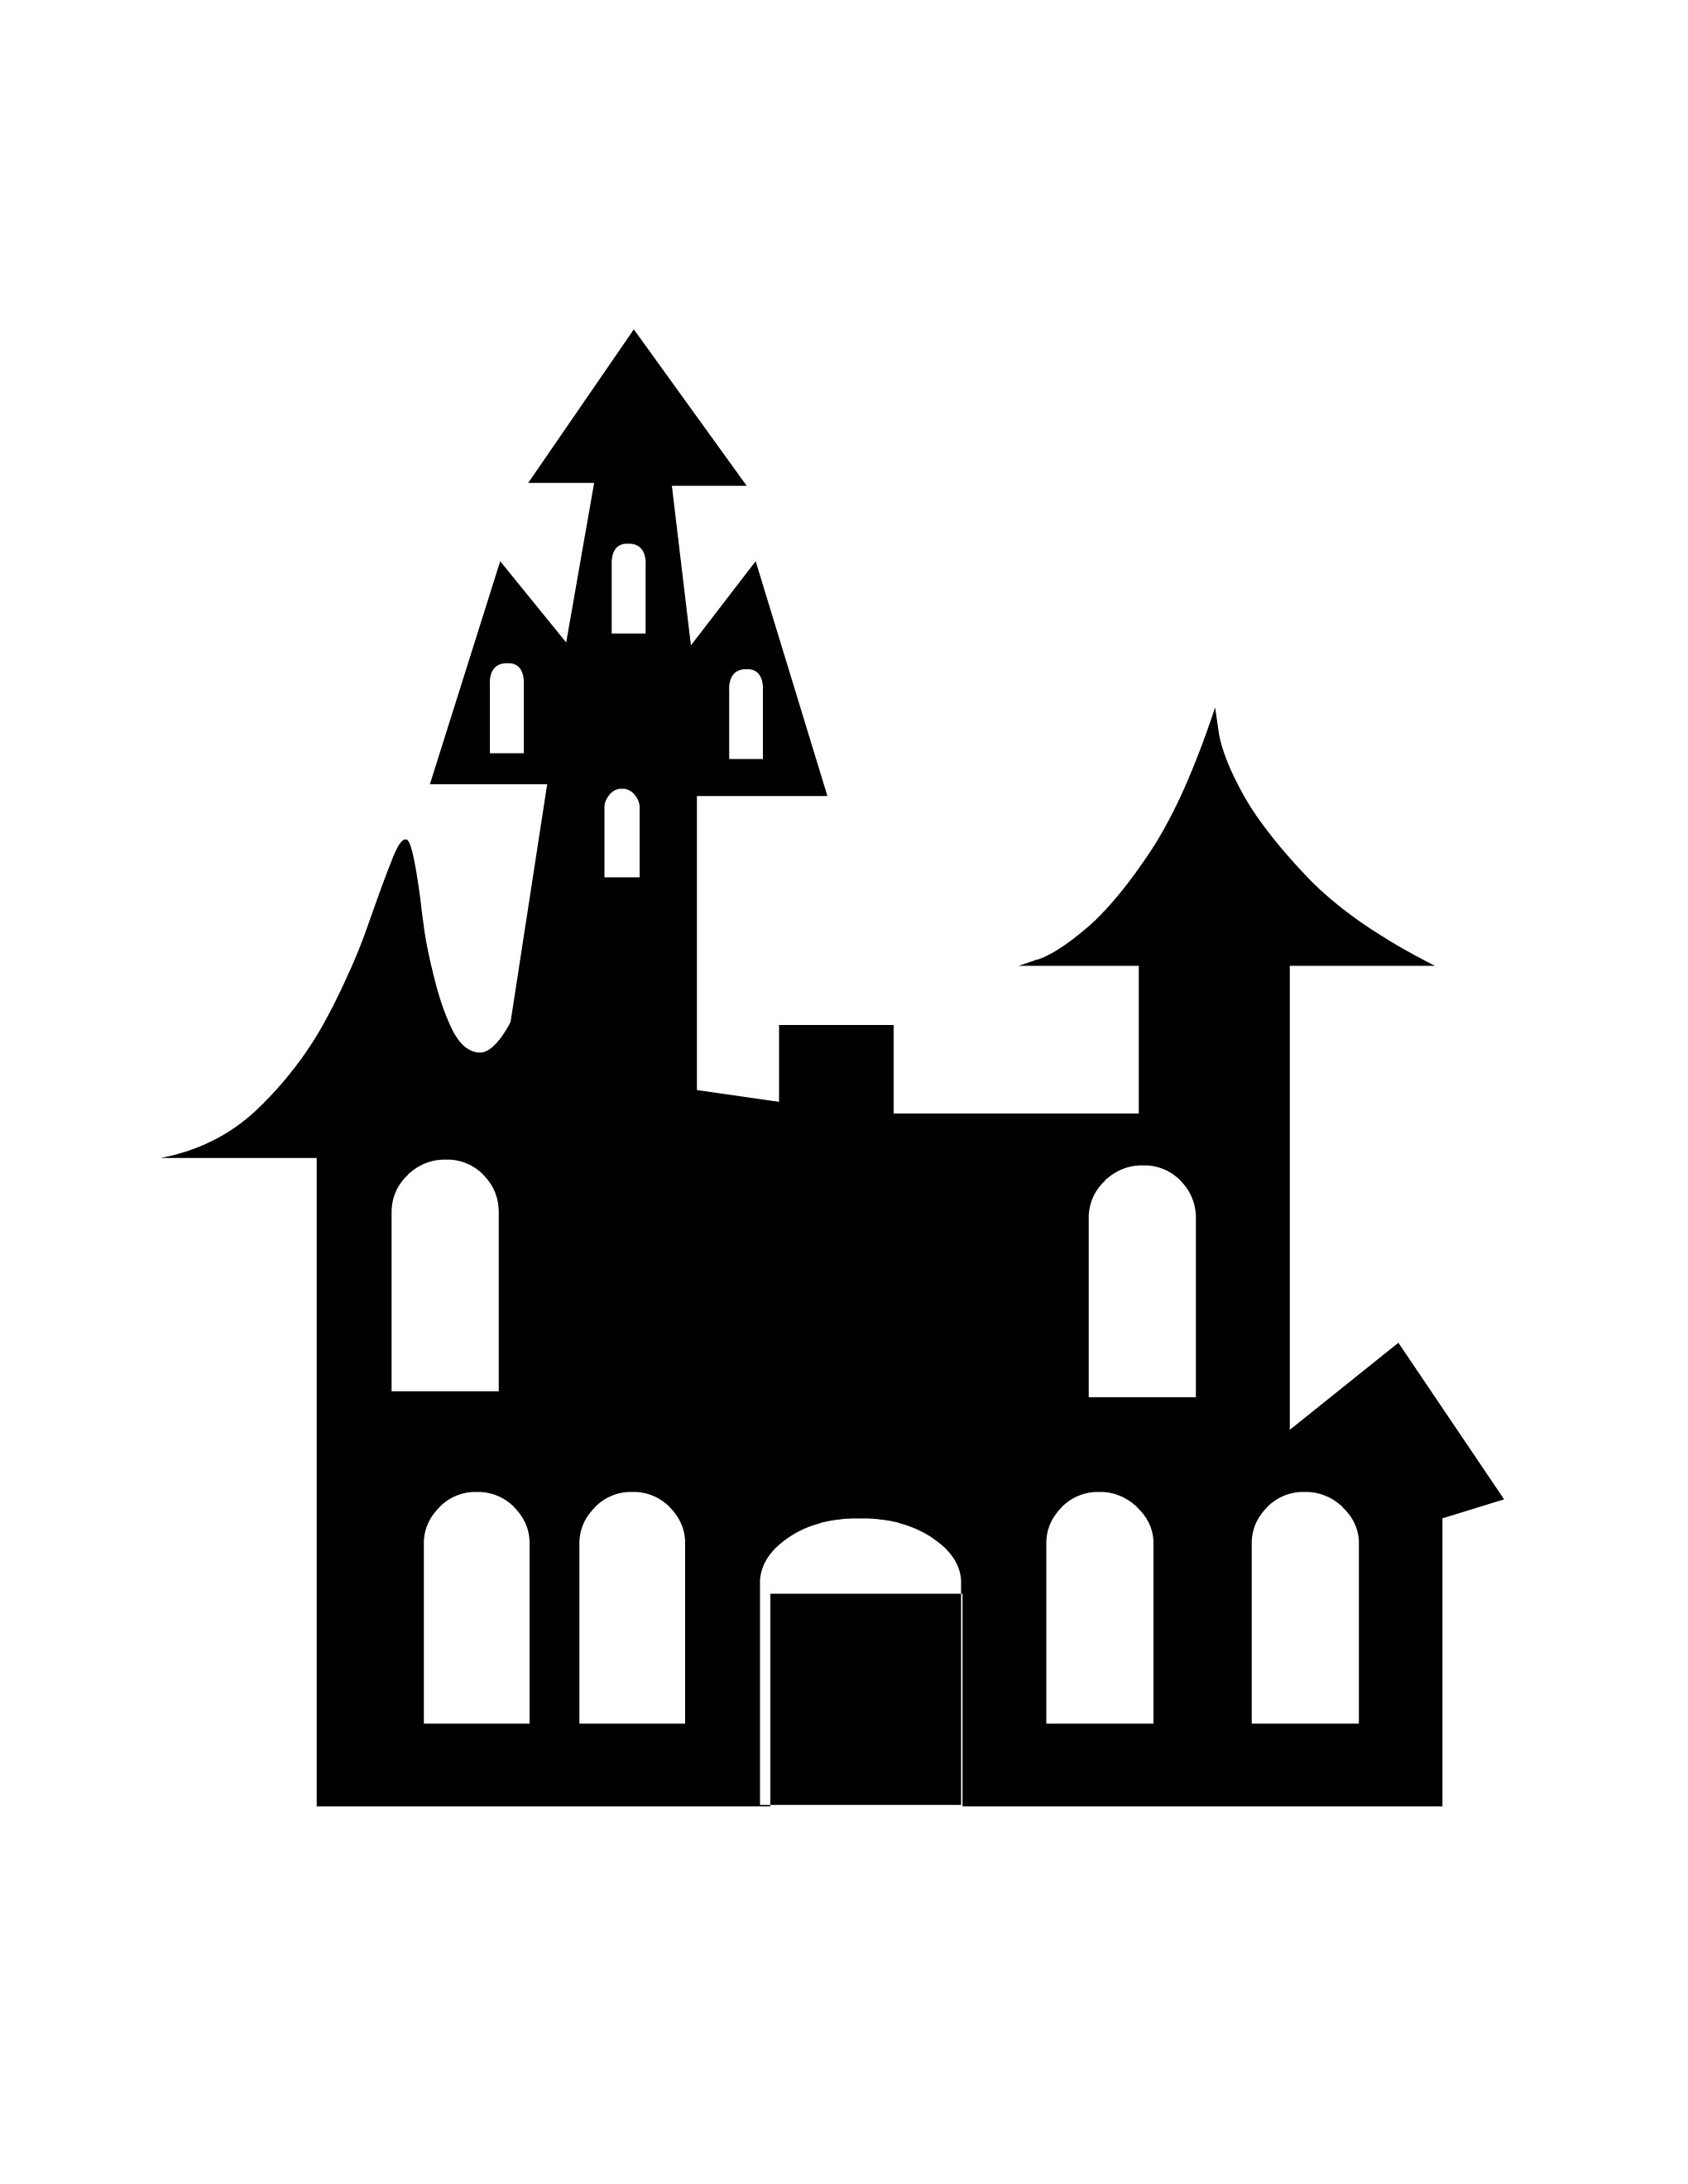 Haunted House Silhouette | PSD File